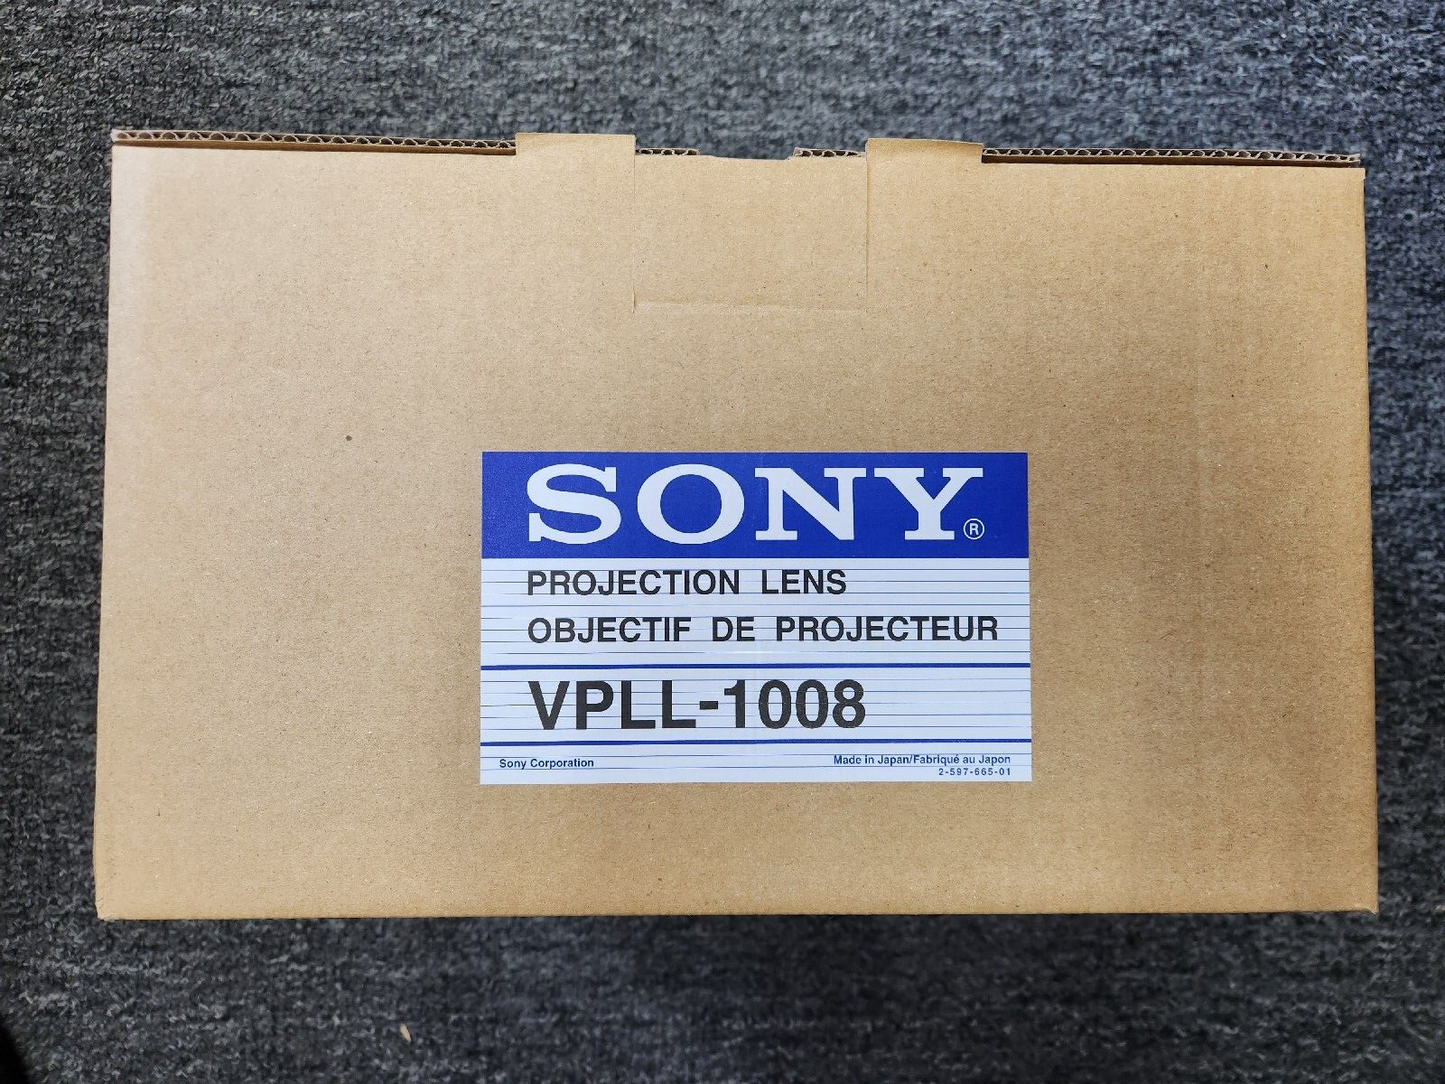 Sony VPLL-1008 Manual Fixed 0.8:1 Short Projection Lens with Adapter NEW